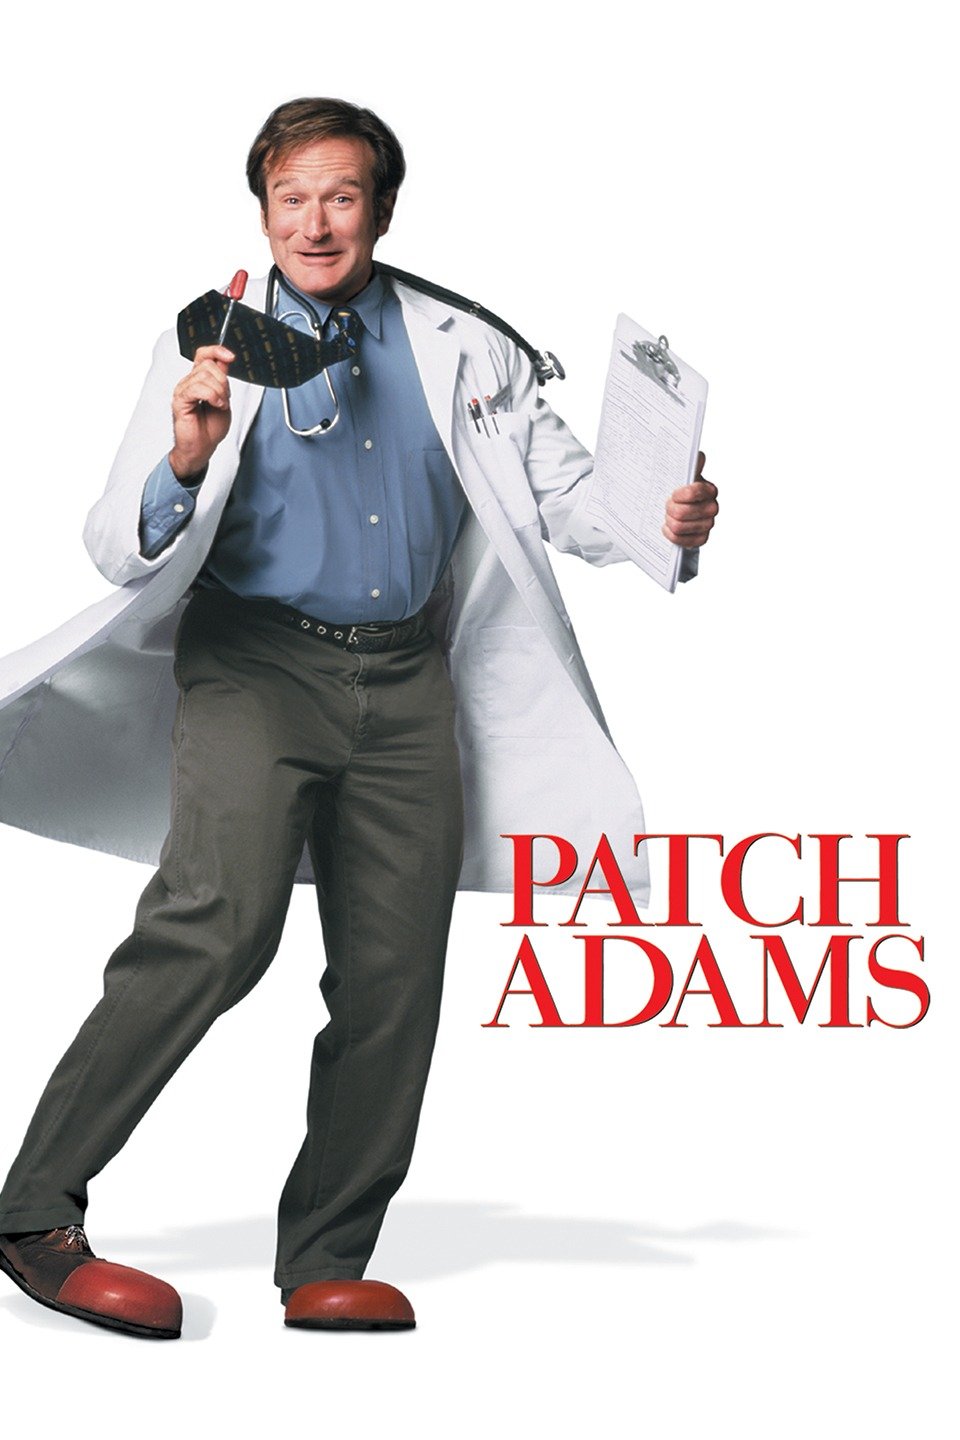 Patch Adams - Rotten Tomatoes